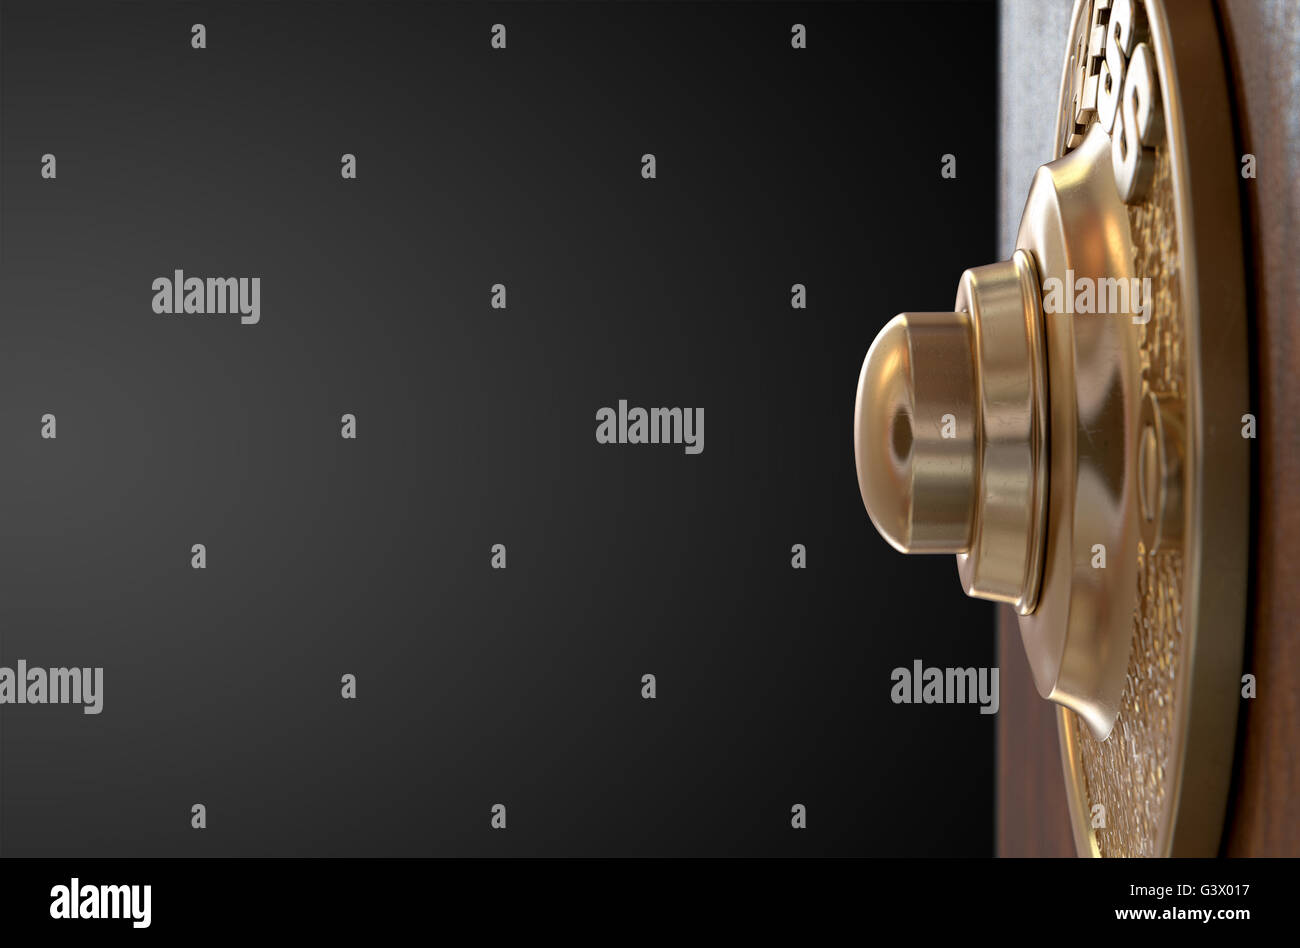 A 3D render of a vintage brass doorbell on an isolated wooden background Stock Photo